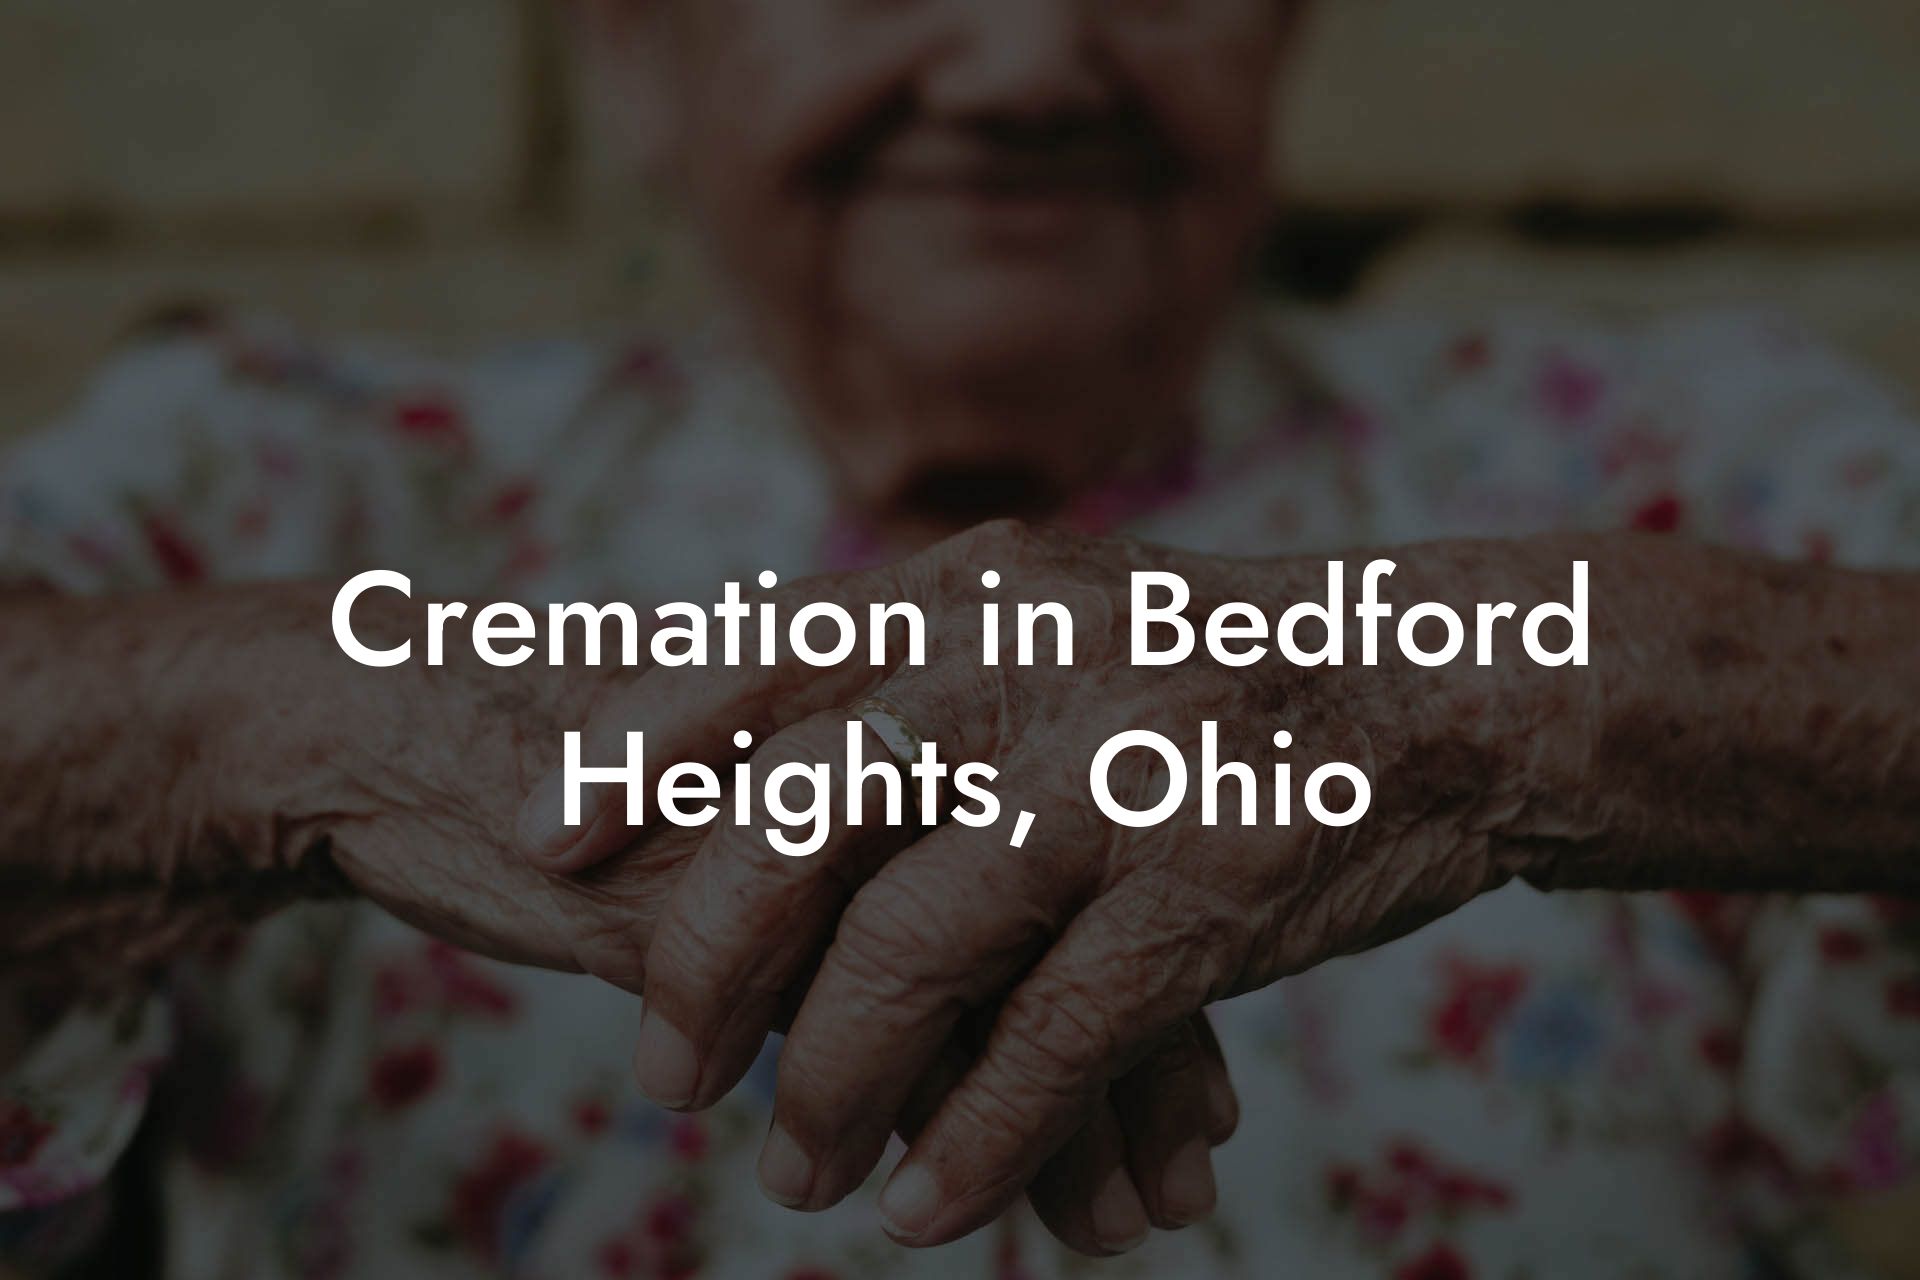 Cremation in Bedford Heights, Ohio